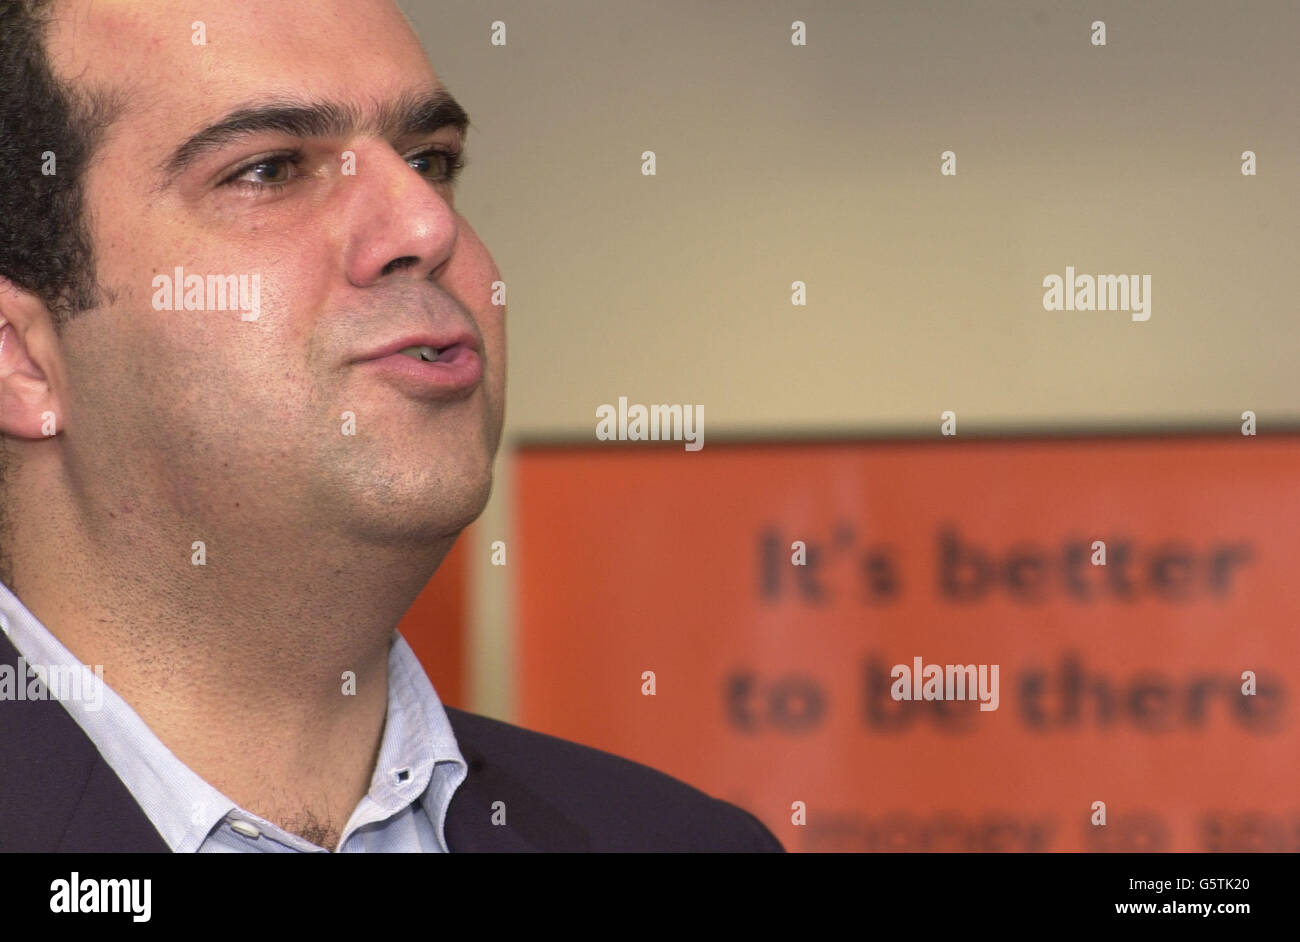 Stelios Haji-loannou announces his intention of stepping down as chairman of easyJet.com at a press conference was held at London Luton Airport. Stock Photo